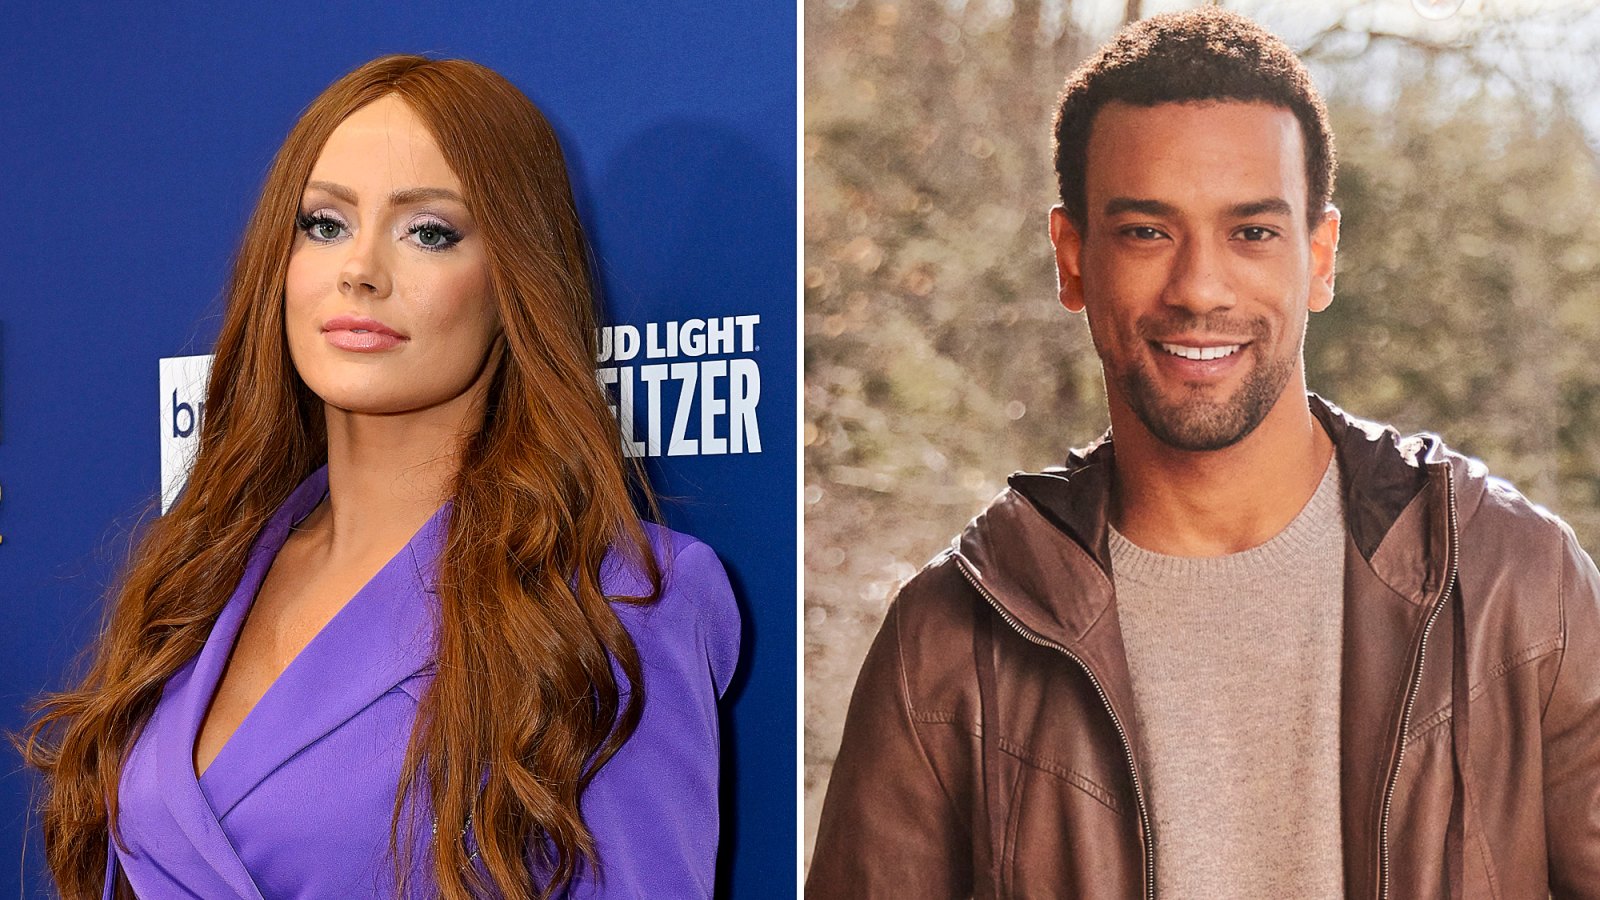 Southern Charm’s Kathryn Dennis and Jason Cameron ‘Hit it Off’ After Meeting at BravoCon- ‘He Slid Into Her DMs’ 10